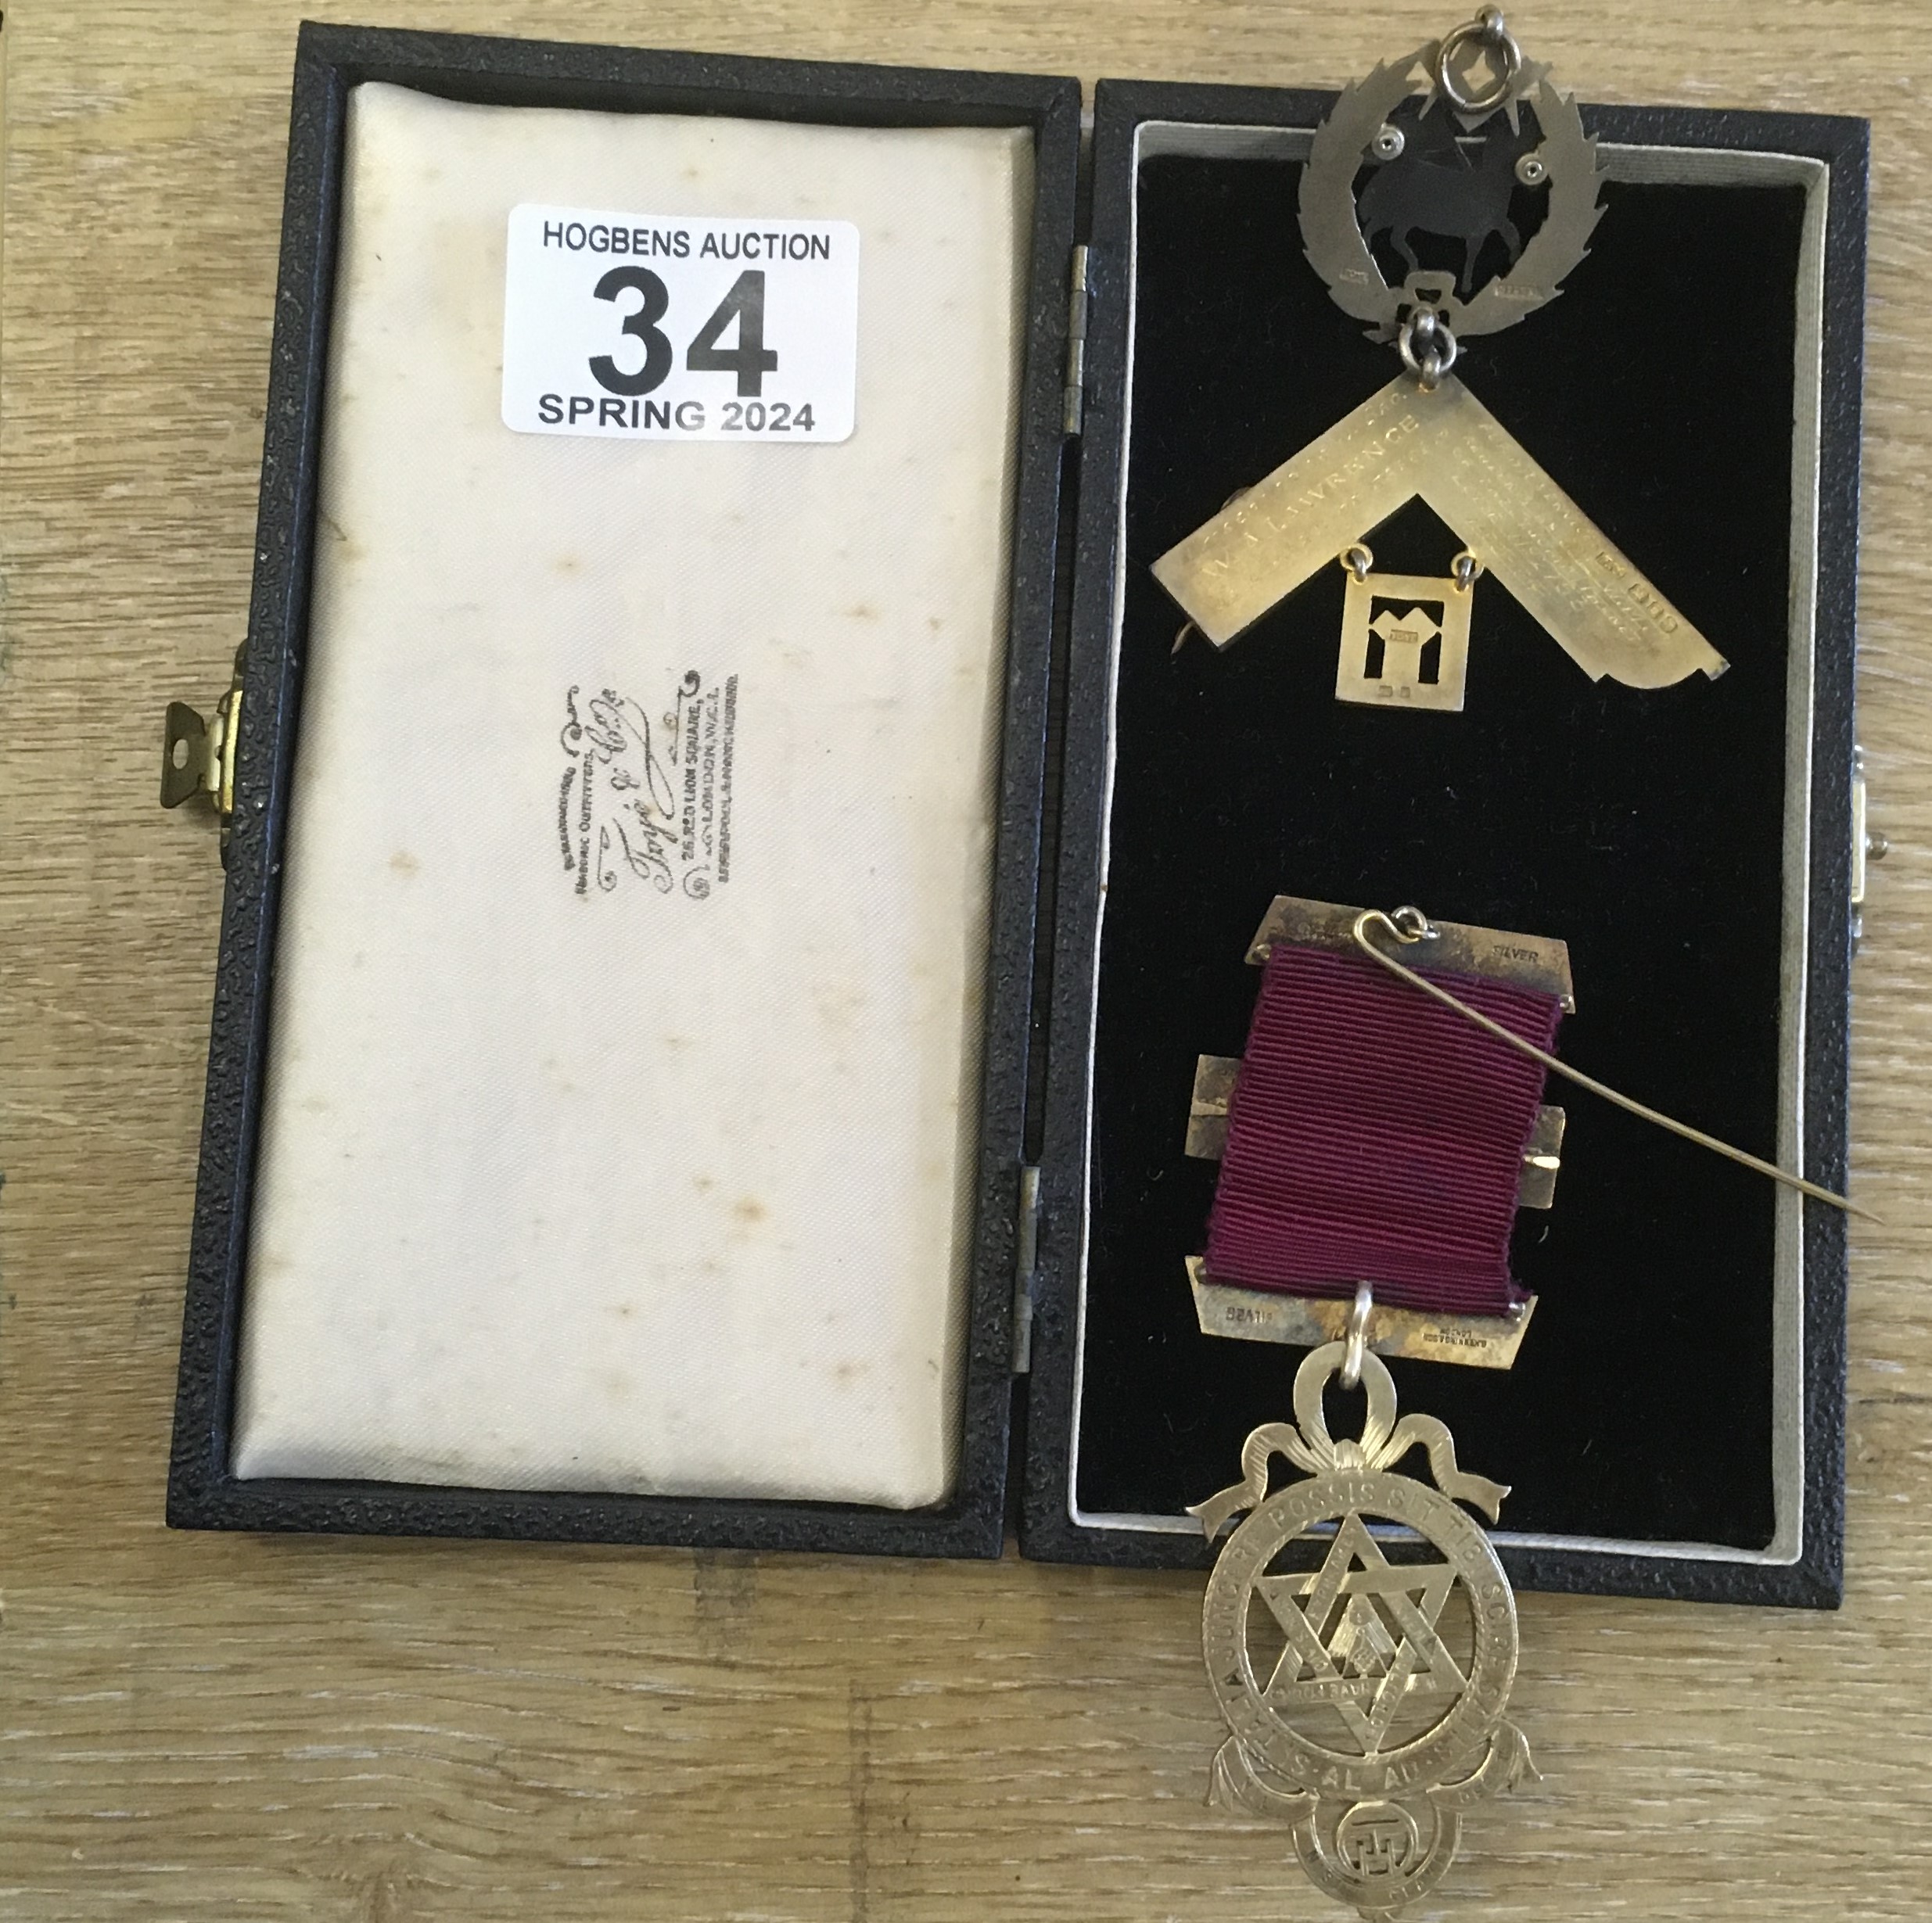 2 x silver Hallmarked Masonic medals or jewels some with enamel decoration in original carrying case - Image 2 of 2